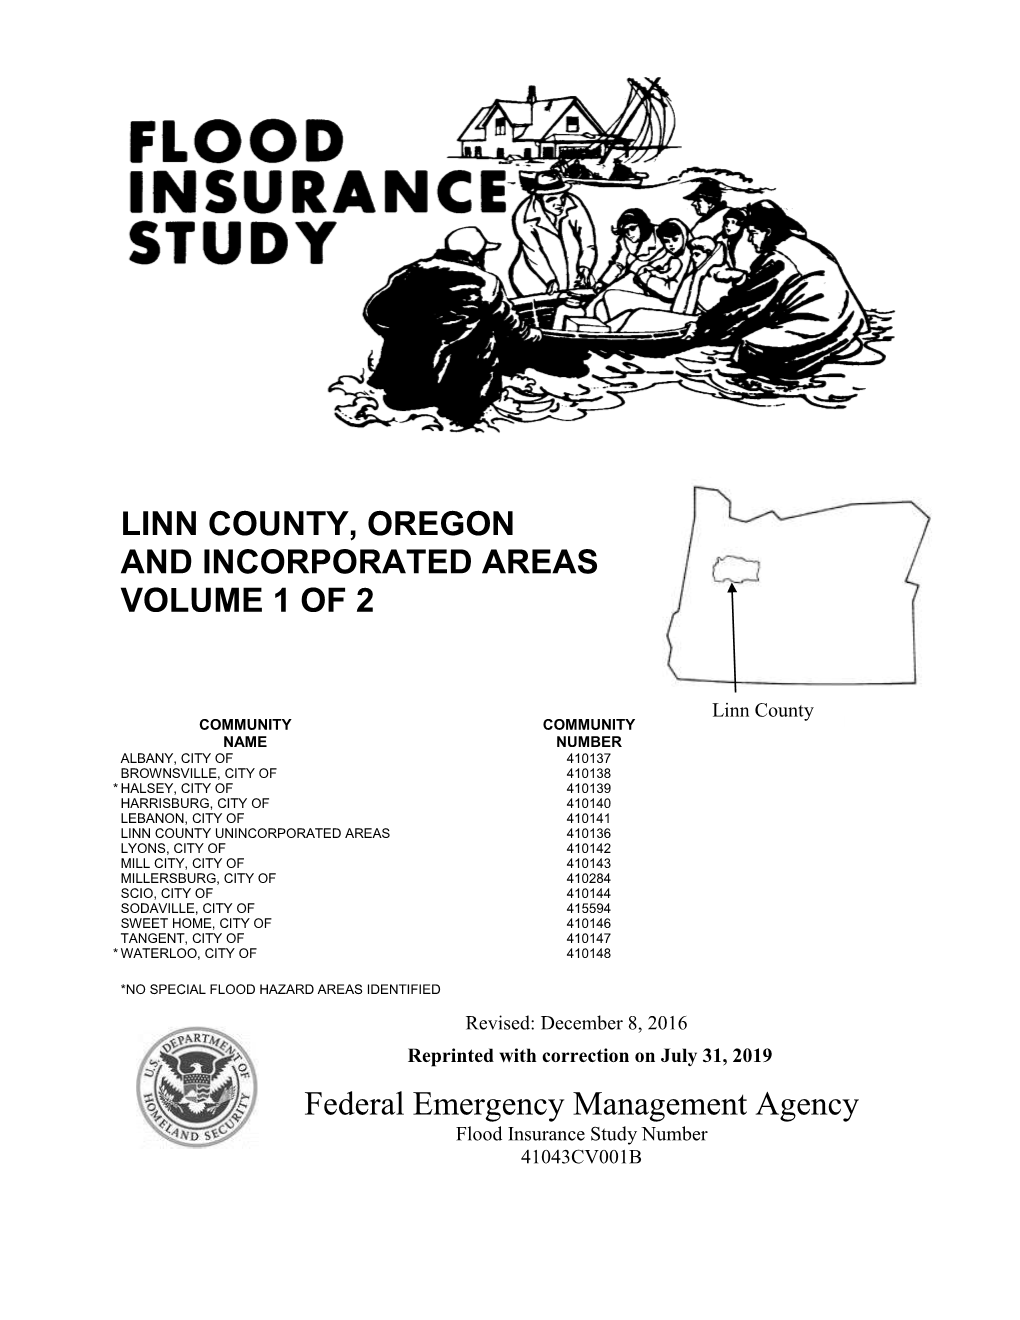 Linn County, Oregon and Incorporated Areas Volume 1 of 2